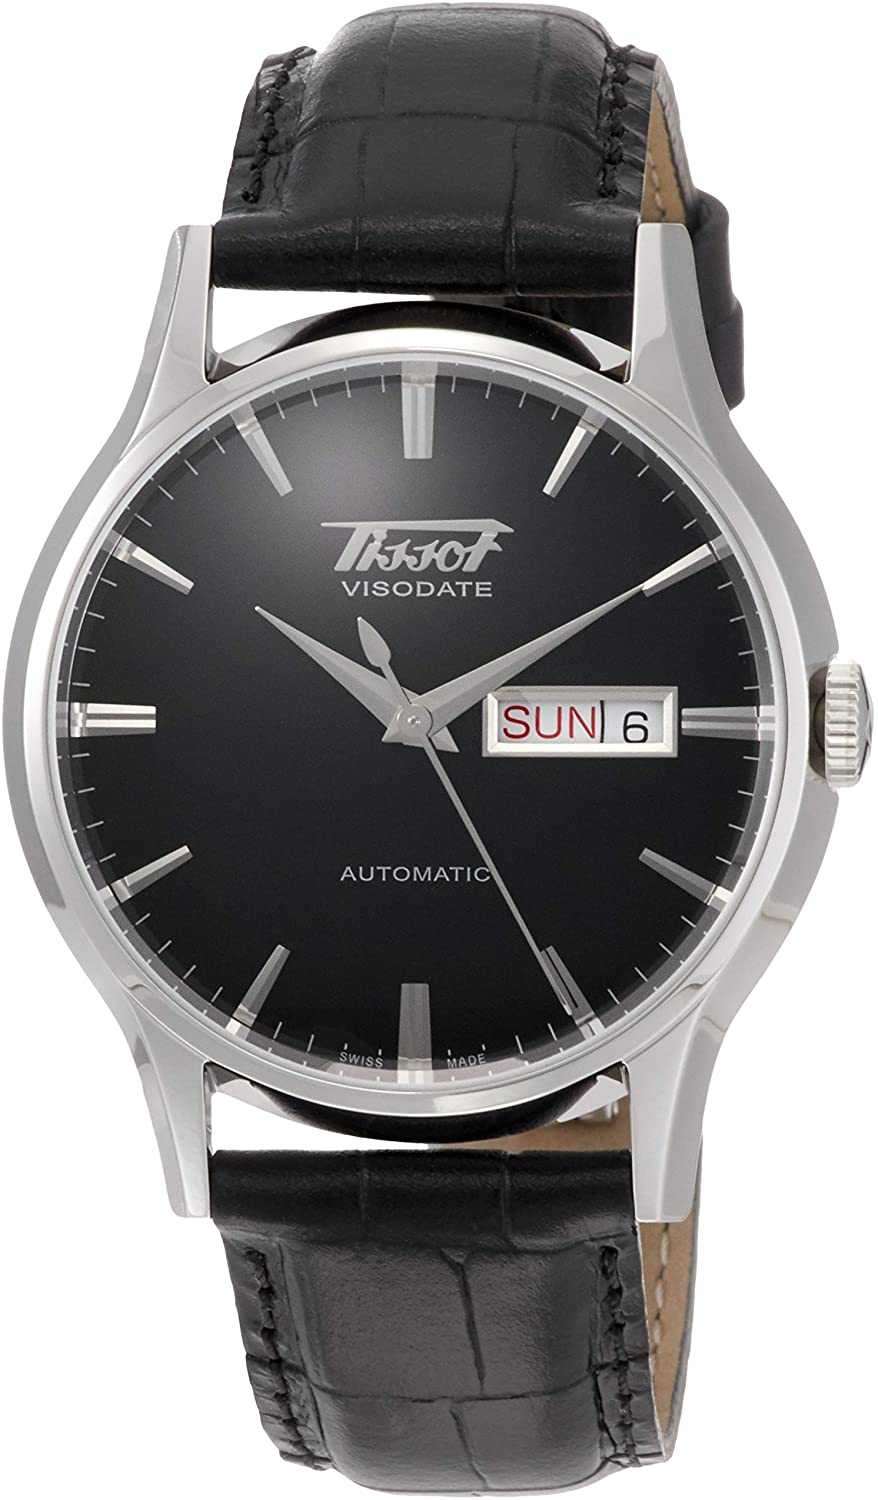 Tissot Heritage Visodate Automatic Watch Black Dial $218.75 + Free Shipping